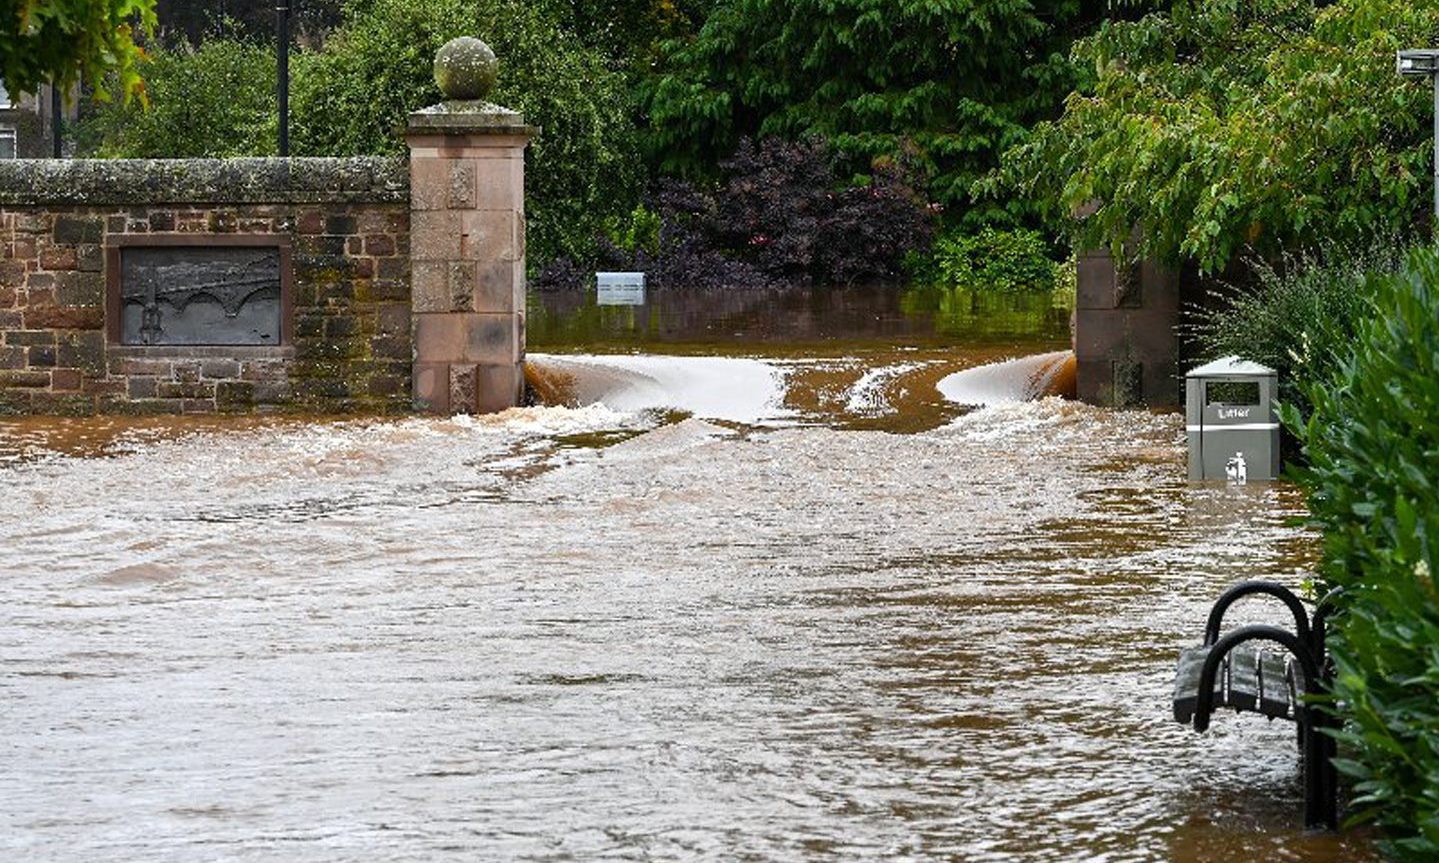 The North Inch flooded.